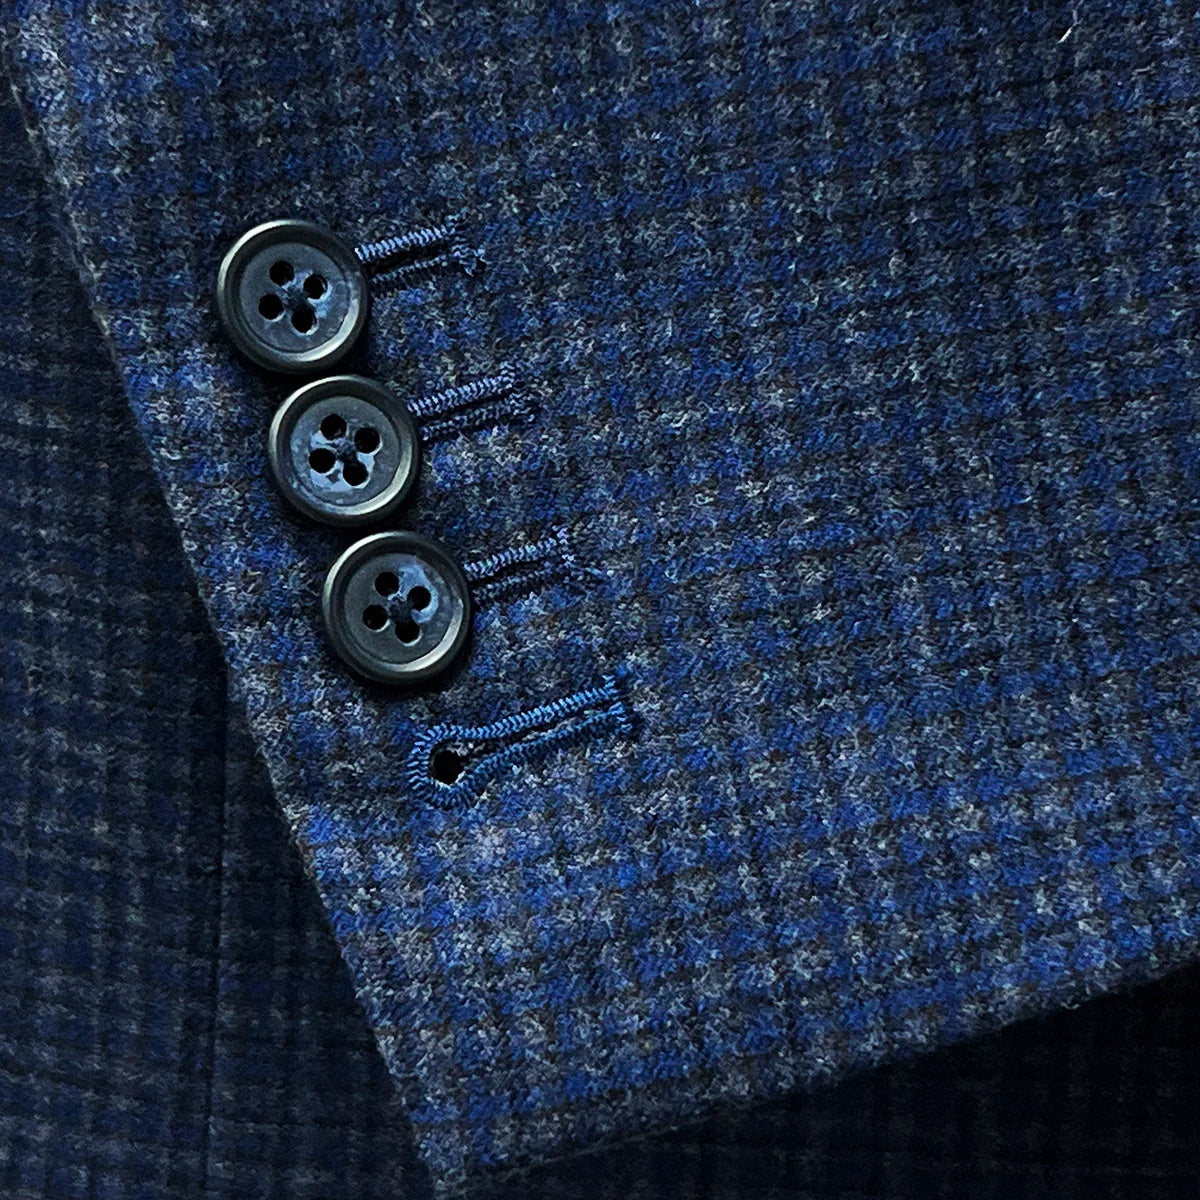 Functional sleeve buttonholes on a gray blue mini grid checks sport coat made of flannel wool for practical style.